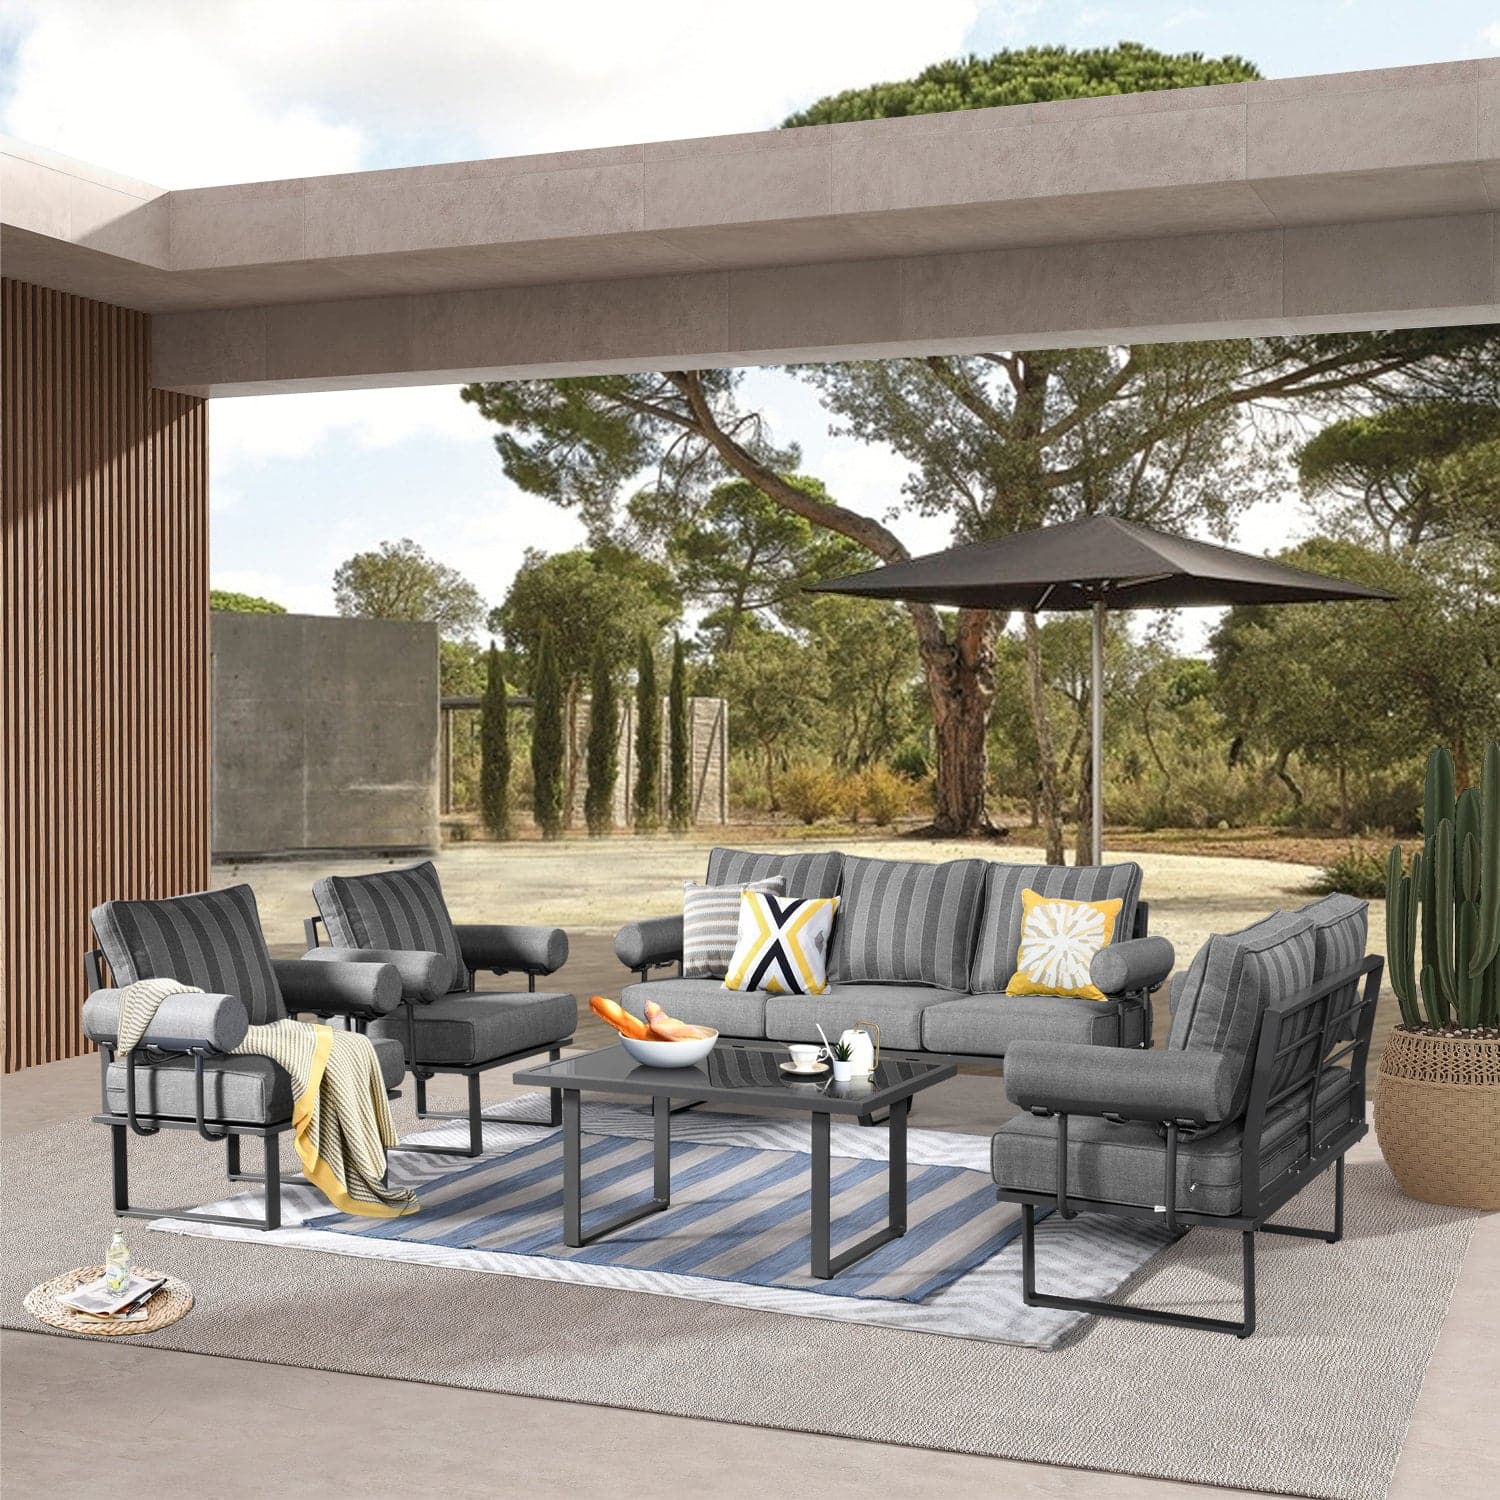 Ovios Patio Conversation Set 7-Person Seating with Table, Aluminum Frame, 5'' Cushion